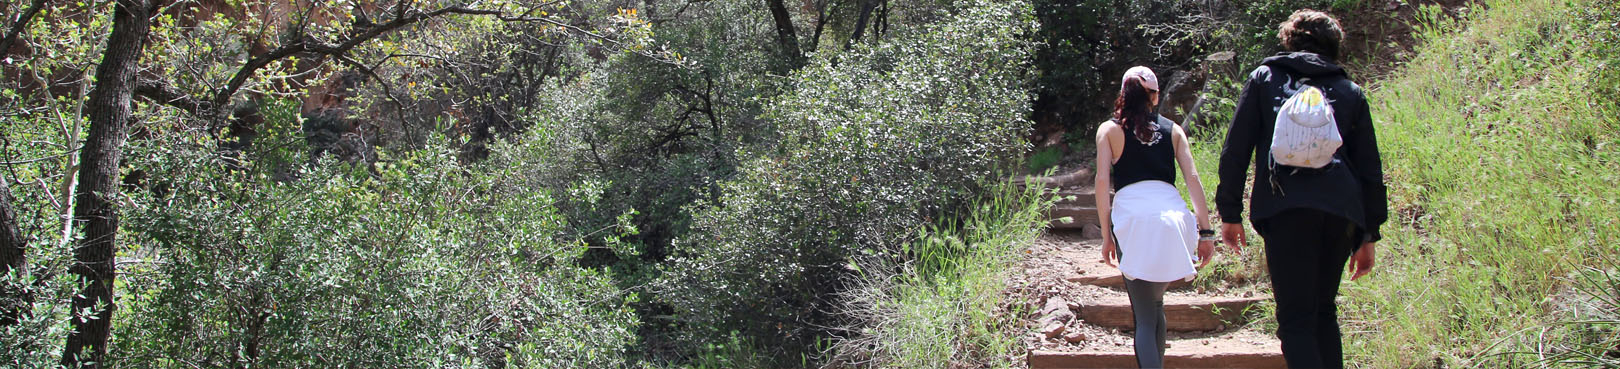 Two hikers on a midday hike down a park trail while surrounded by various oak species and other high desert vegetation.